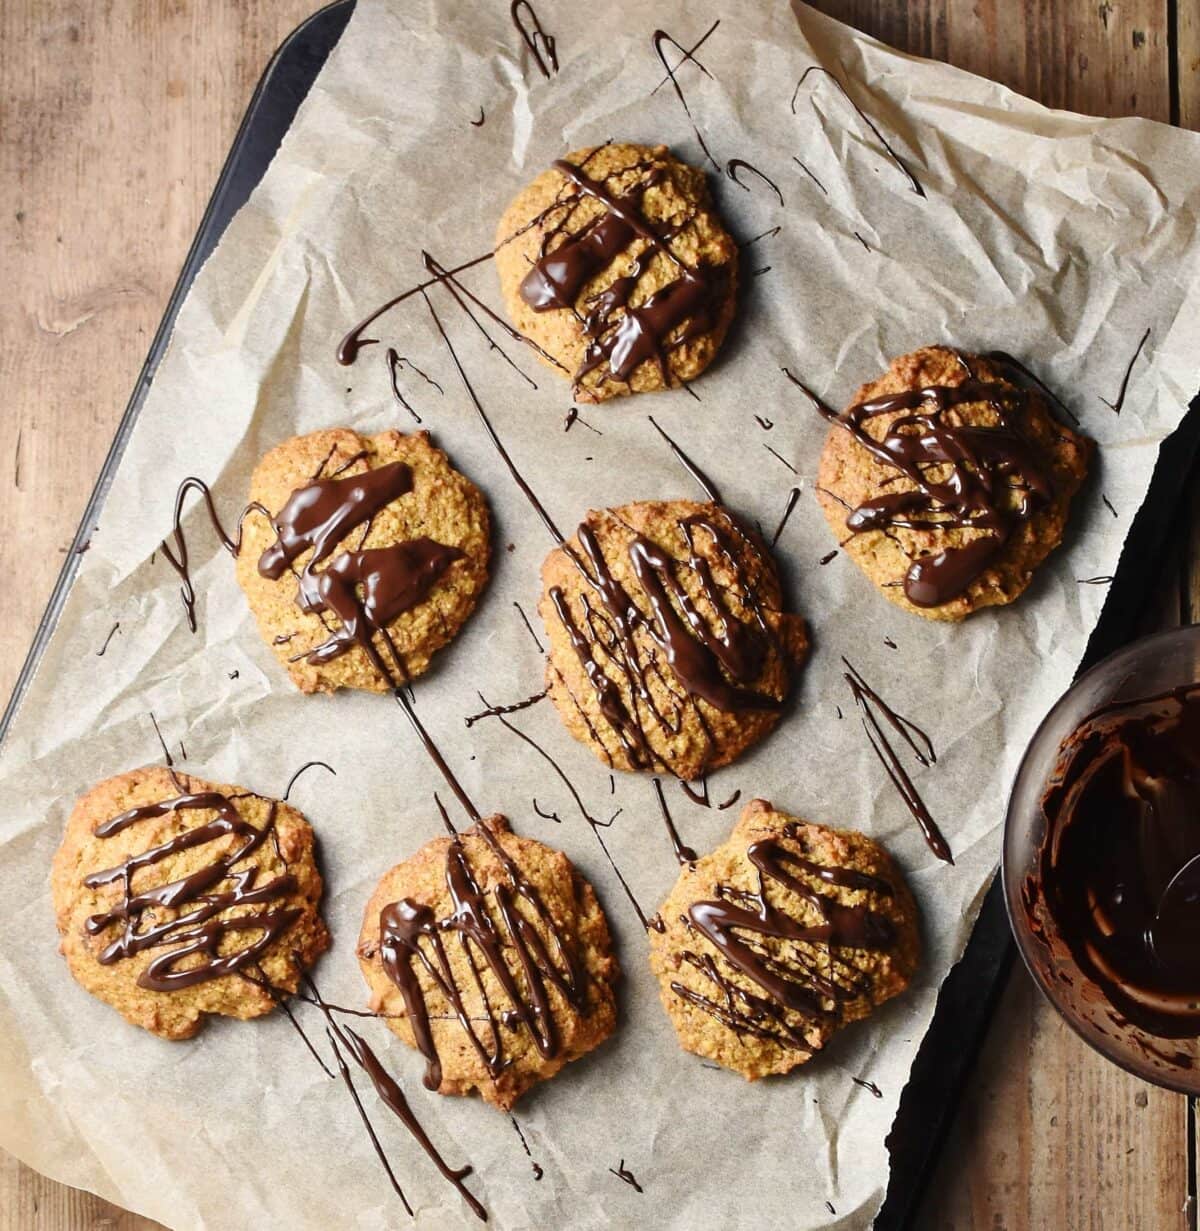 Pumpkin cookies with chocolate drizzle on top of paper.